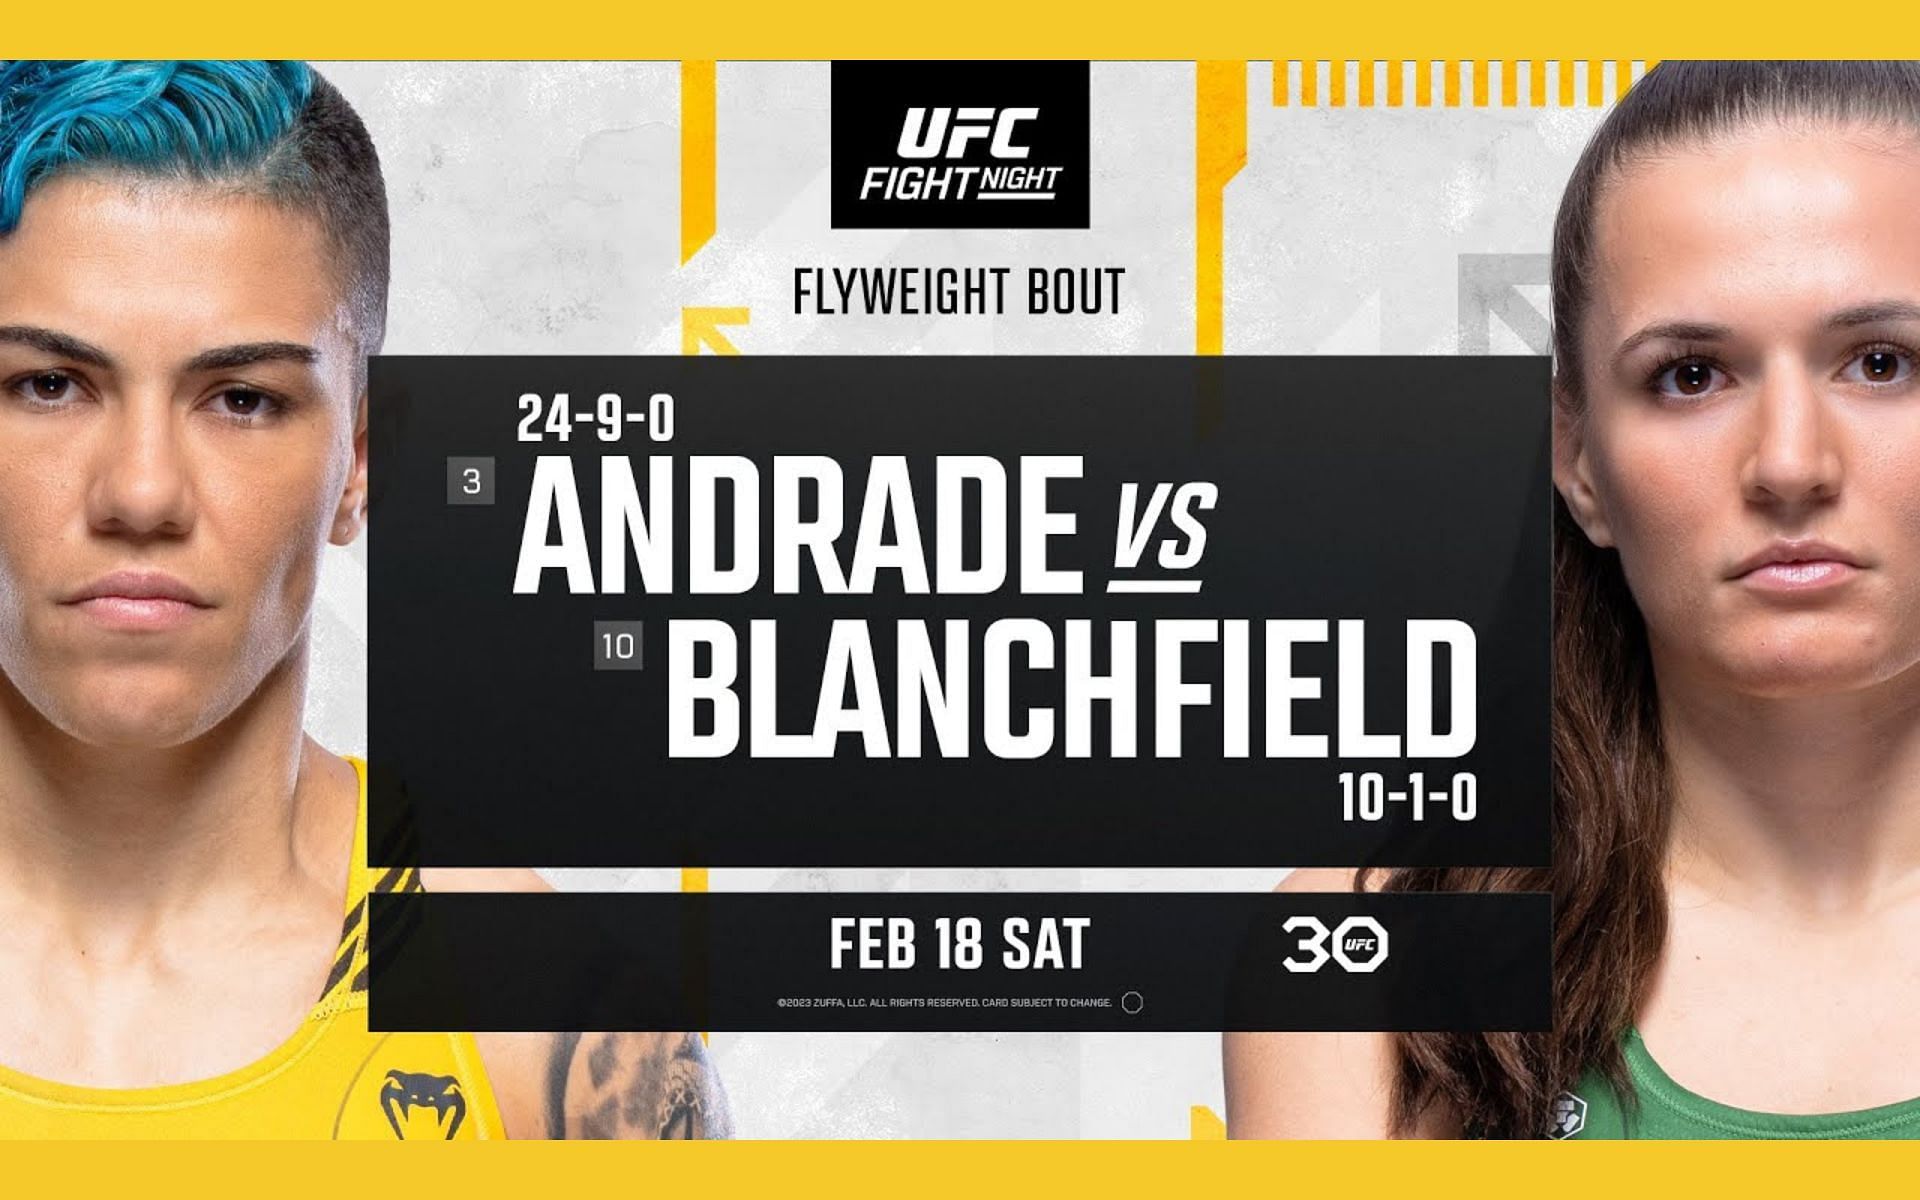 UFC Fight Tonight Is there a UFC card on Saturday, February 18, 2023?